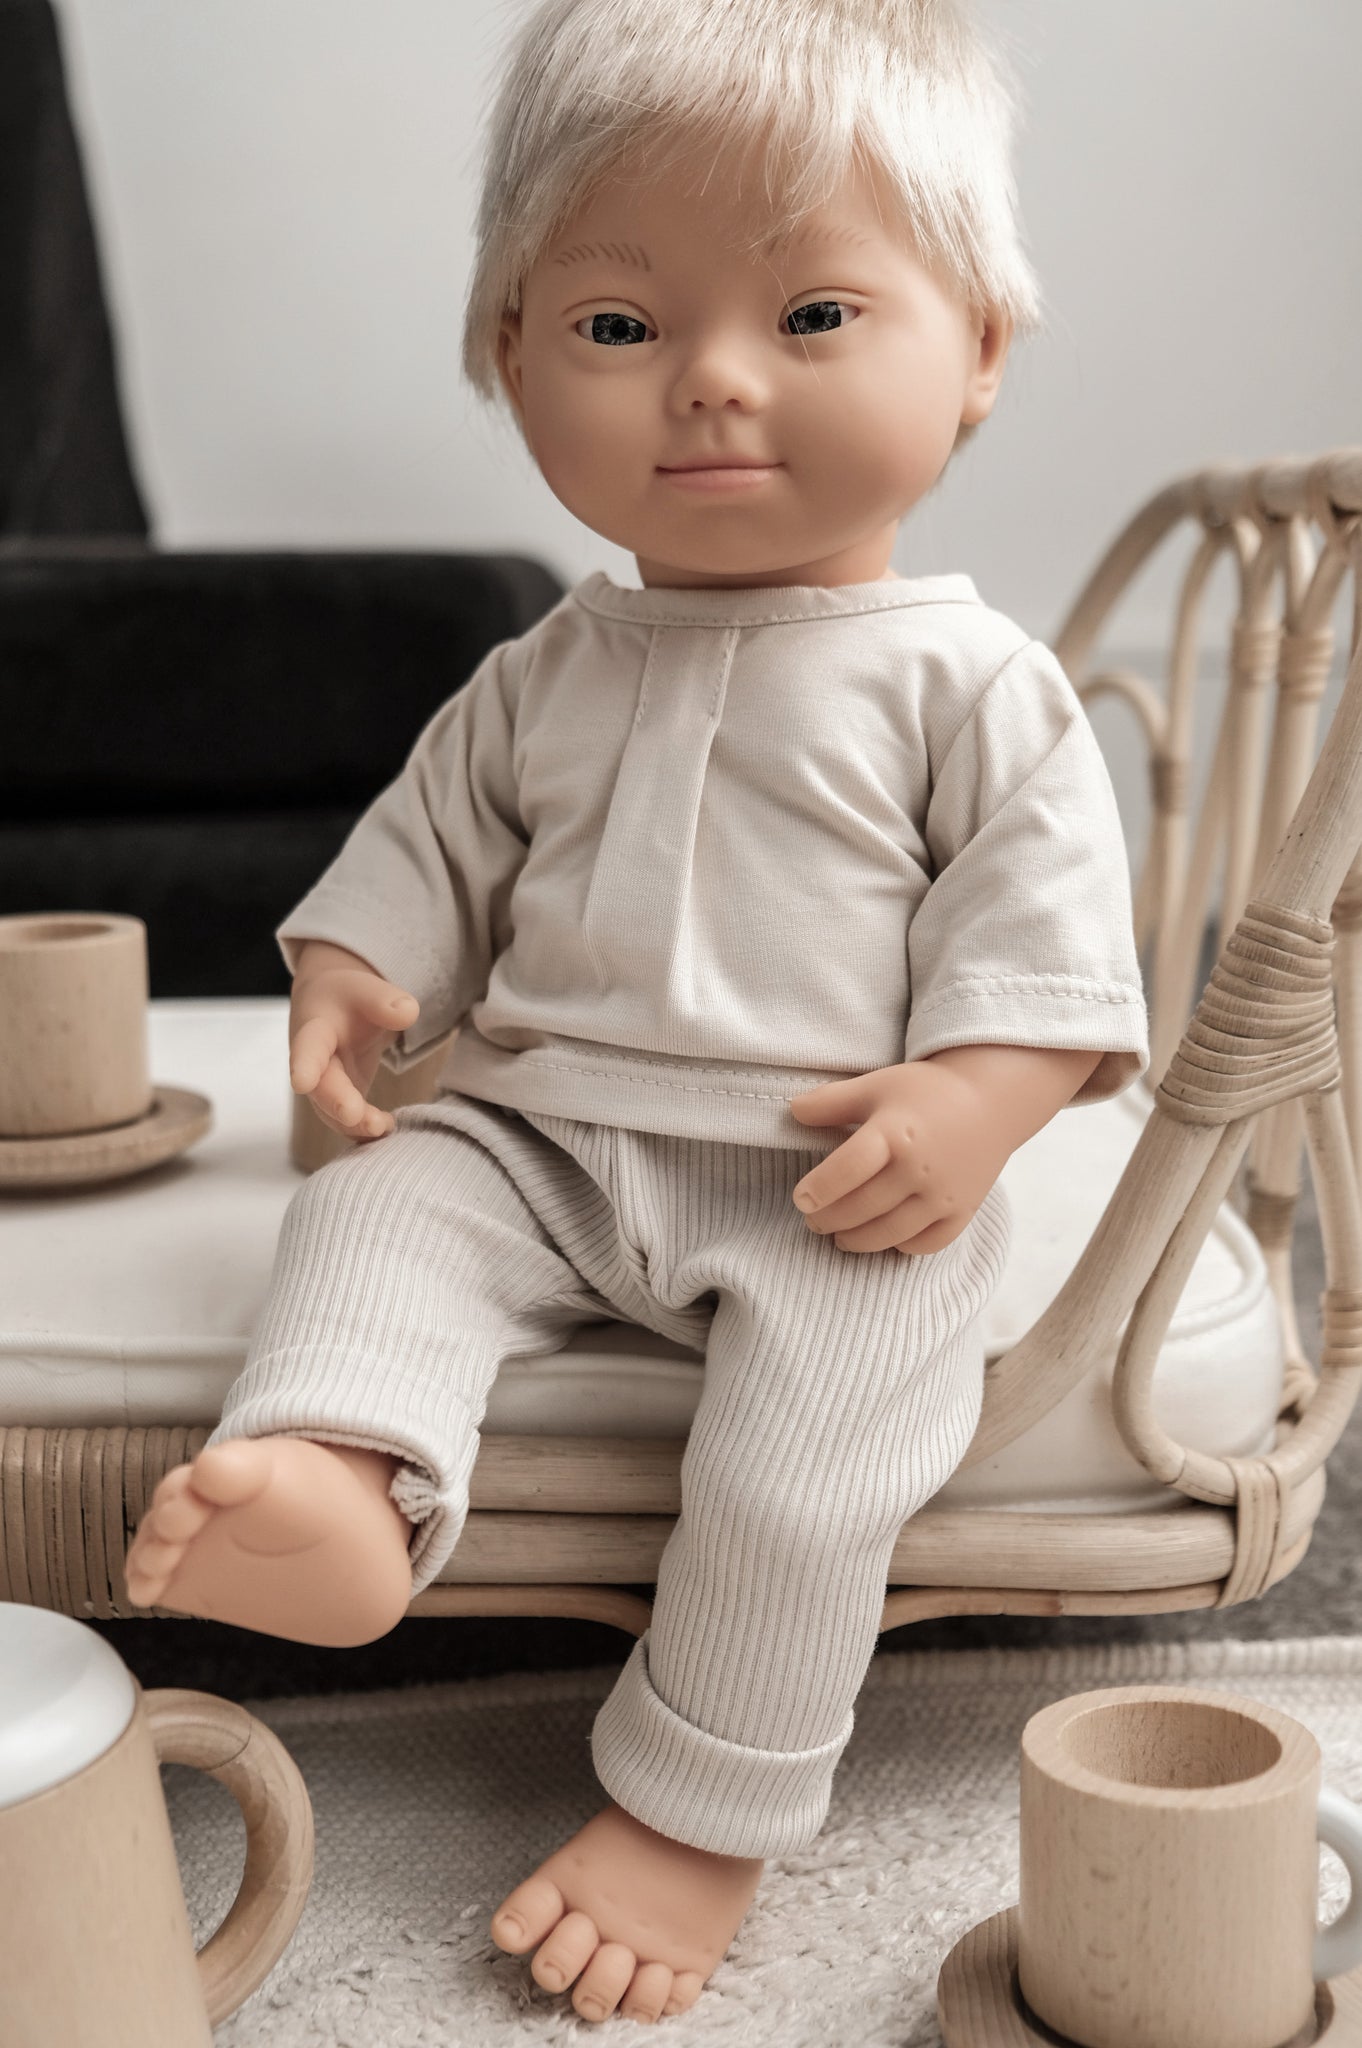 miniland doll with Down syndrome blonde boy 38 cm